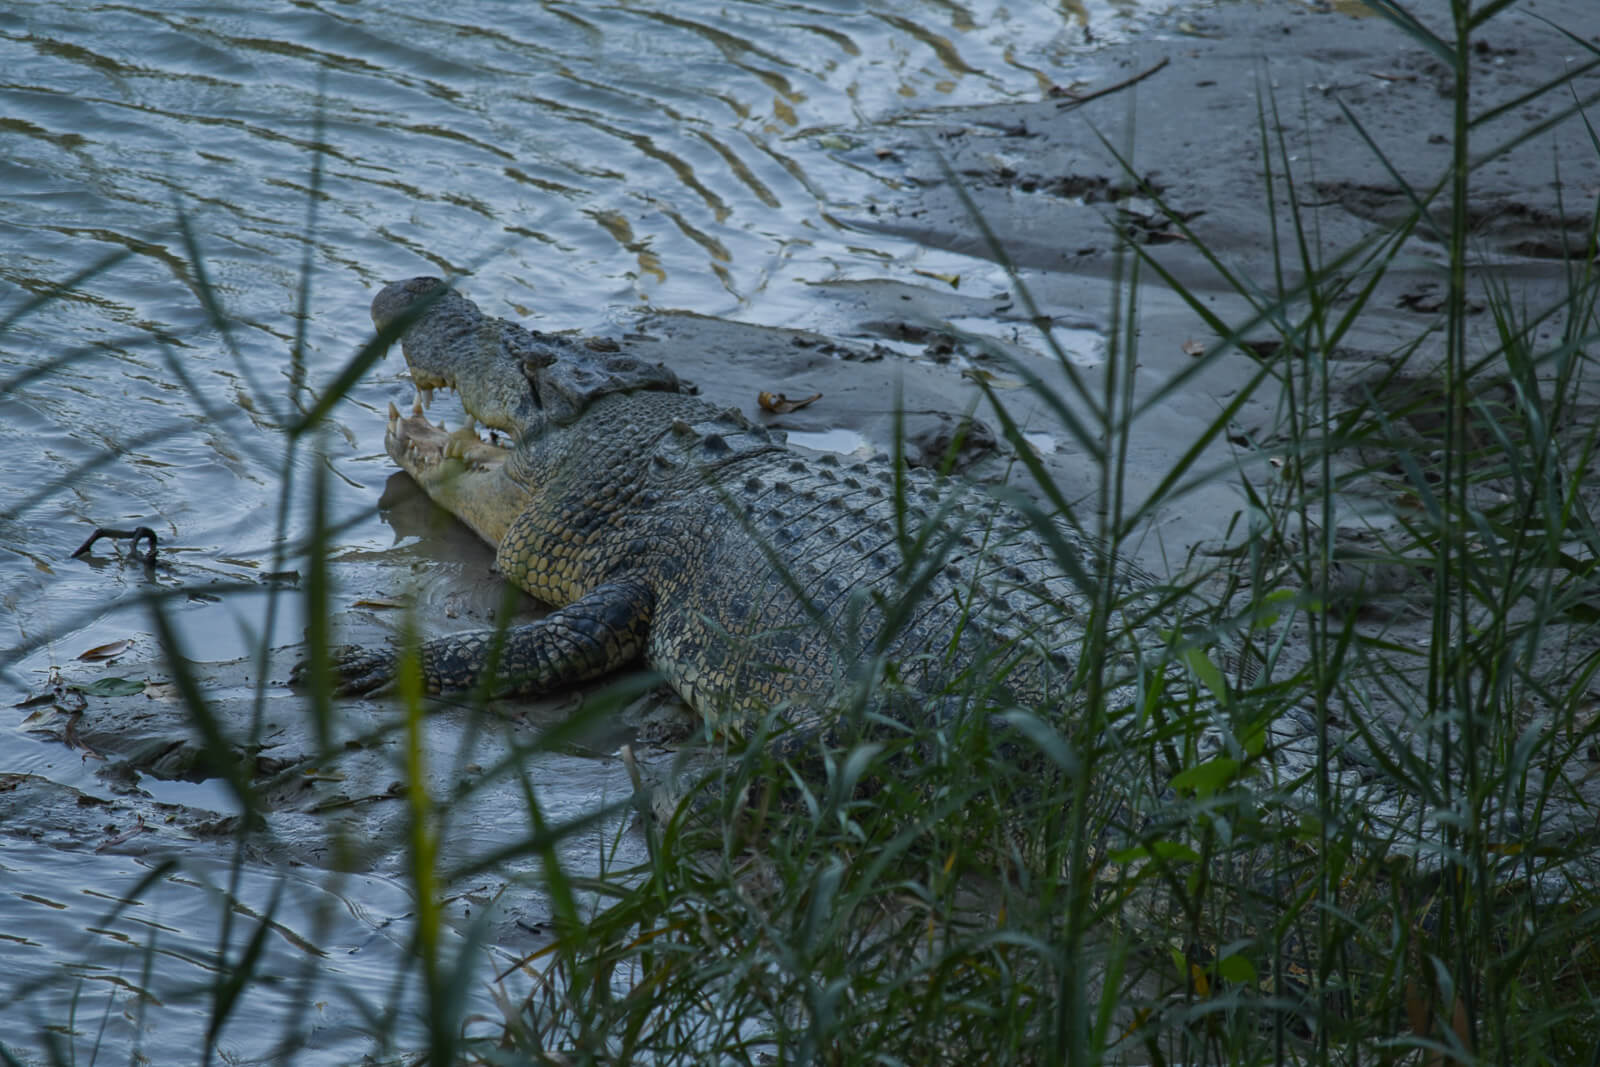 A large saltwater crocodile on the banks at Cahills Crossing on our Kakadu itinerary